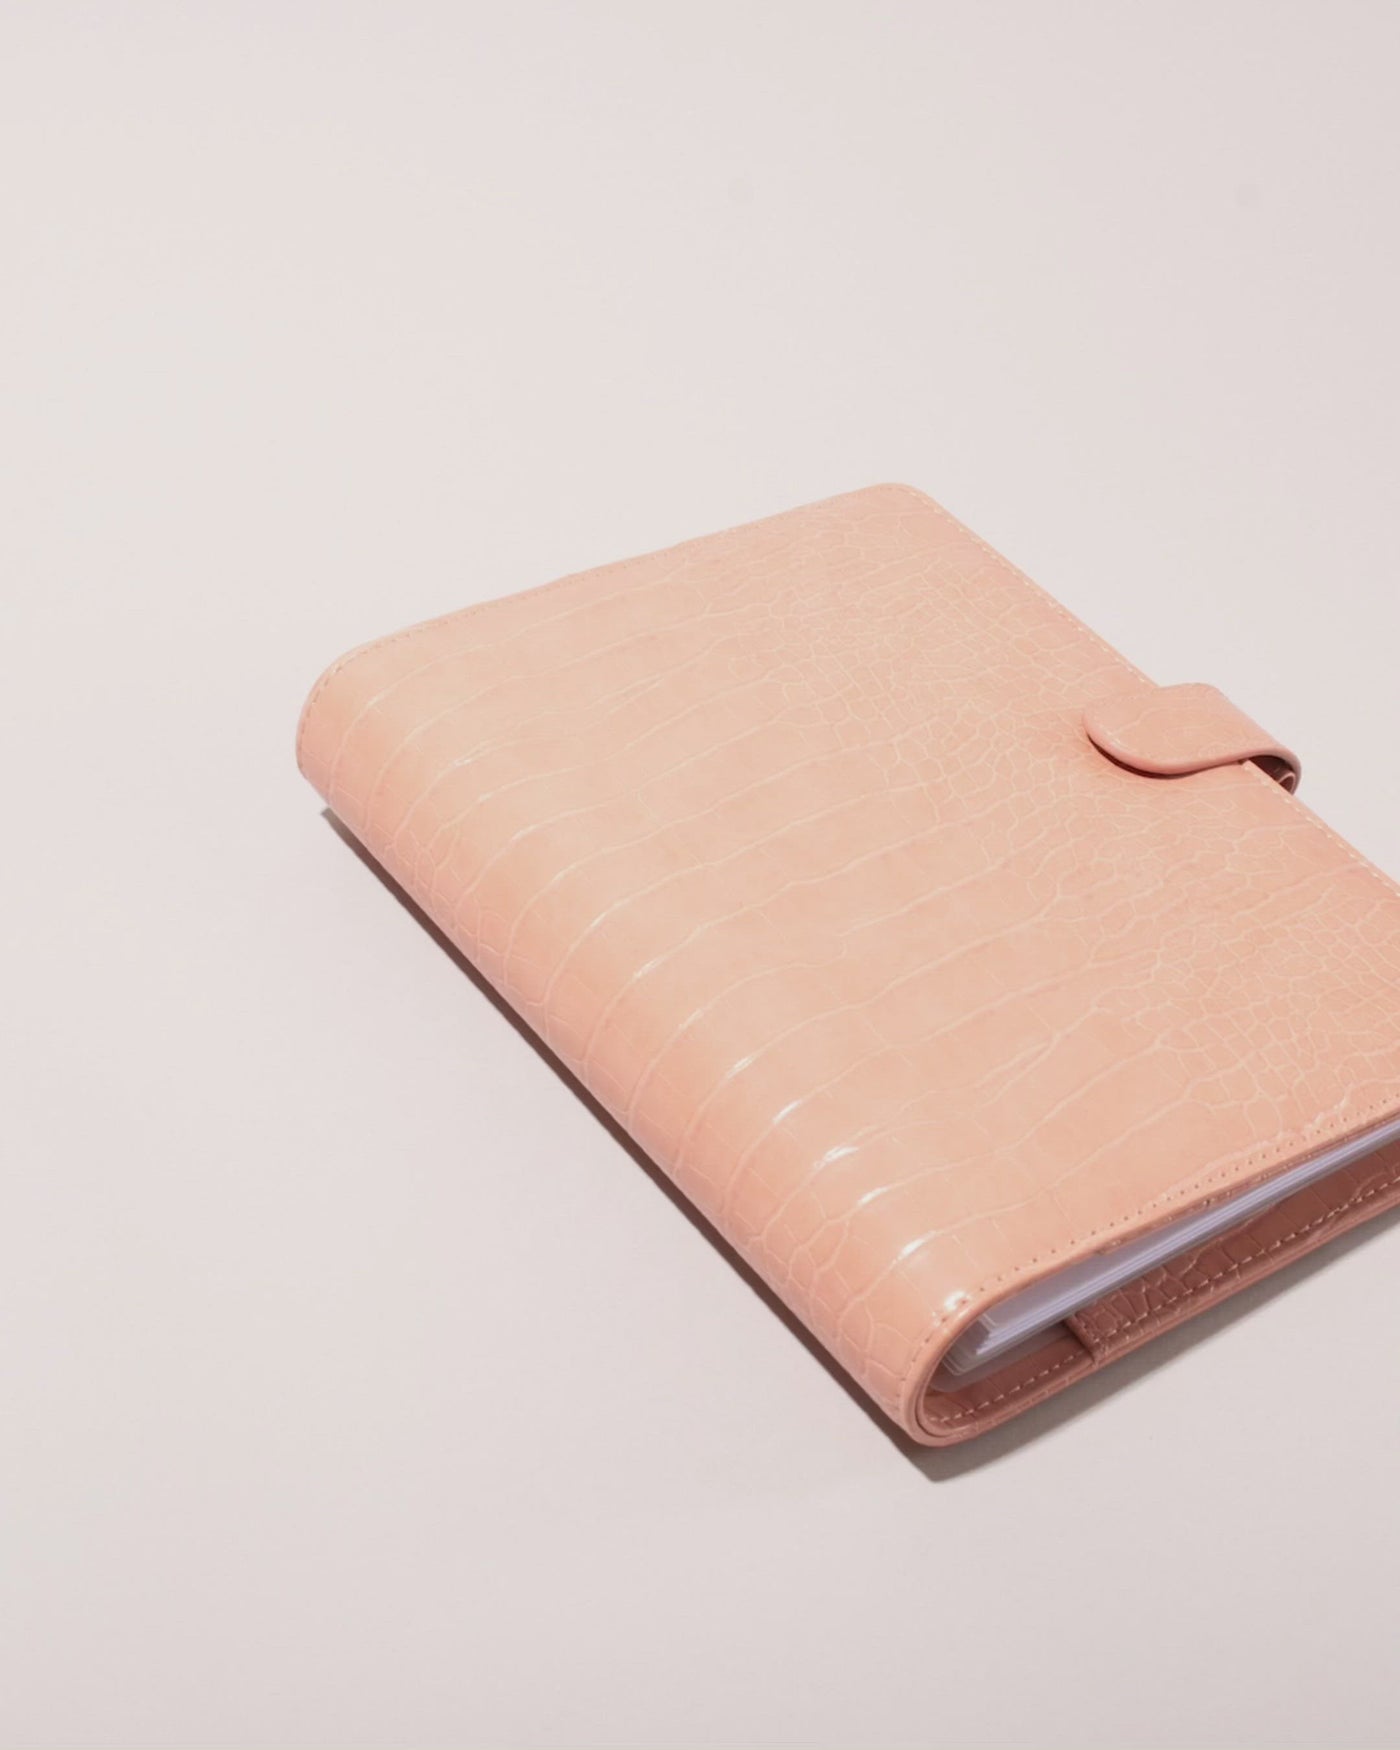 Tan Coral Pink Nude Blush Croc Vegan Leather Planner Cover Discbound Half Letter A5 Planner - Ships from Canada to USA and Worlwide